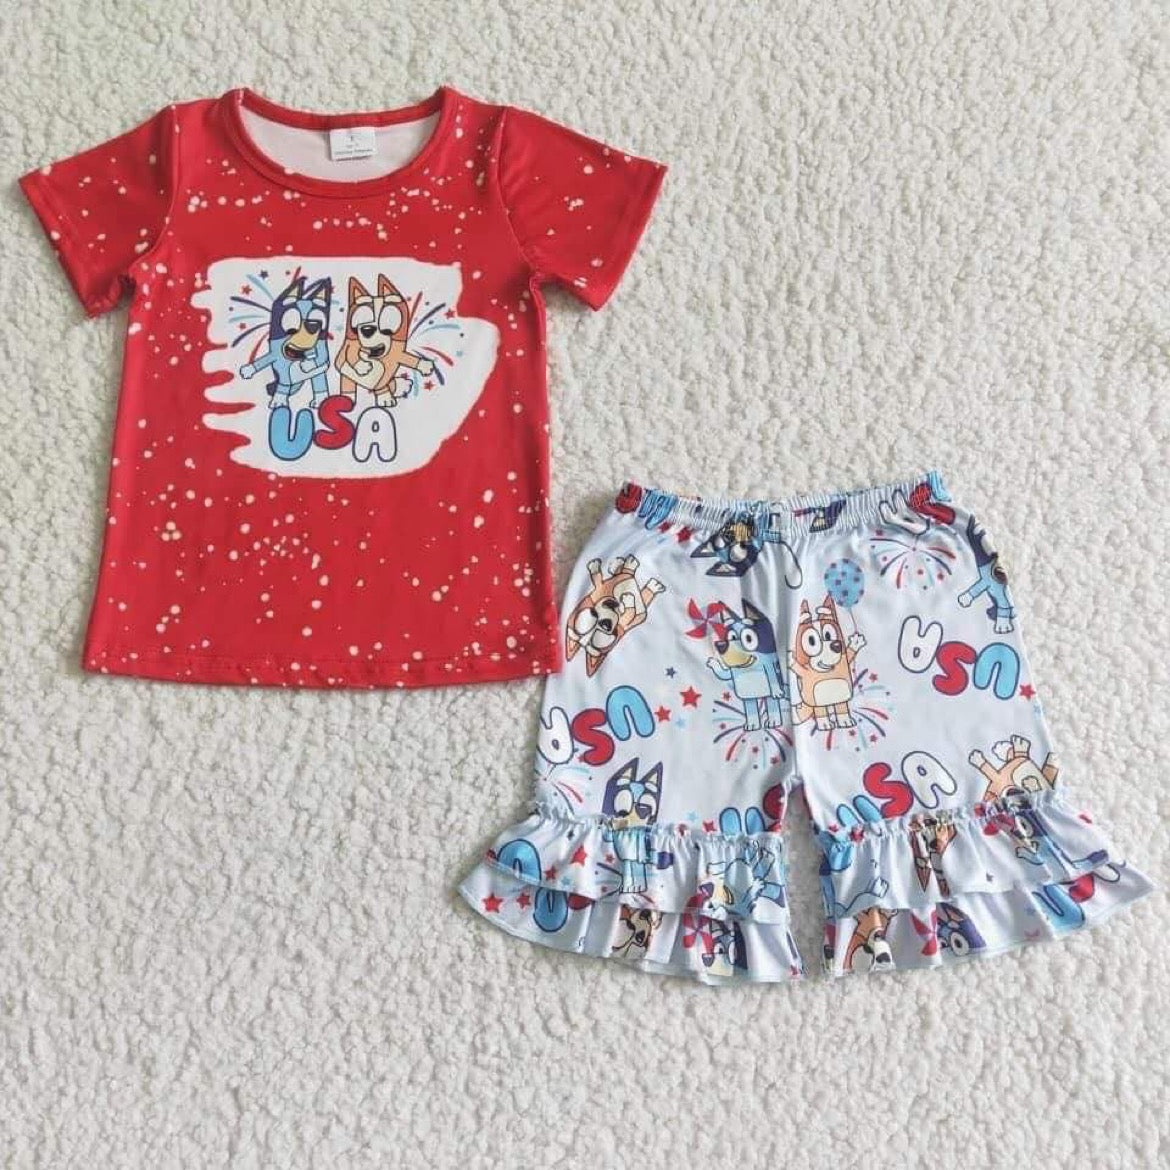 GSSO0053 kids clothes girls red cartoon july 4th outfit patriotic shorts set